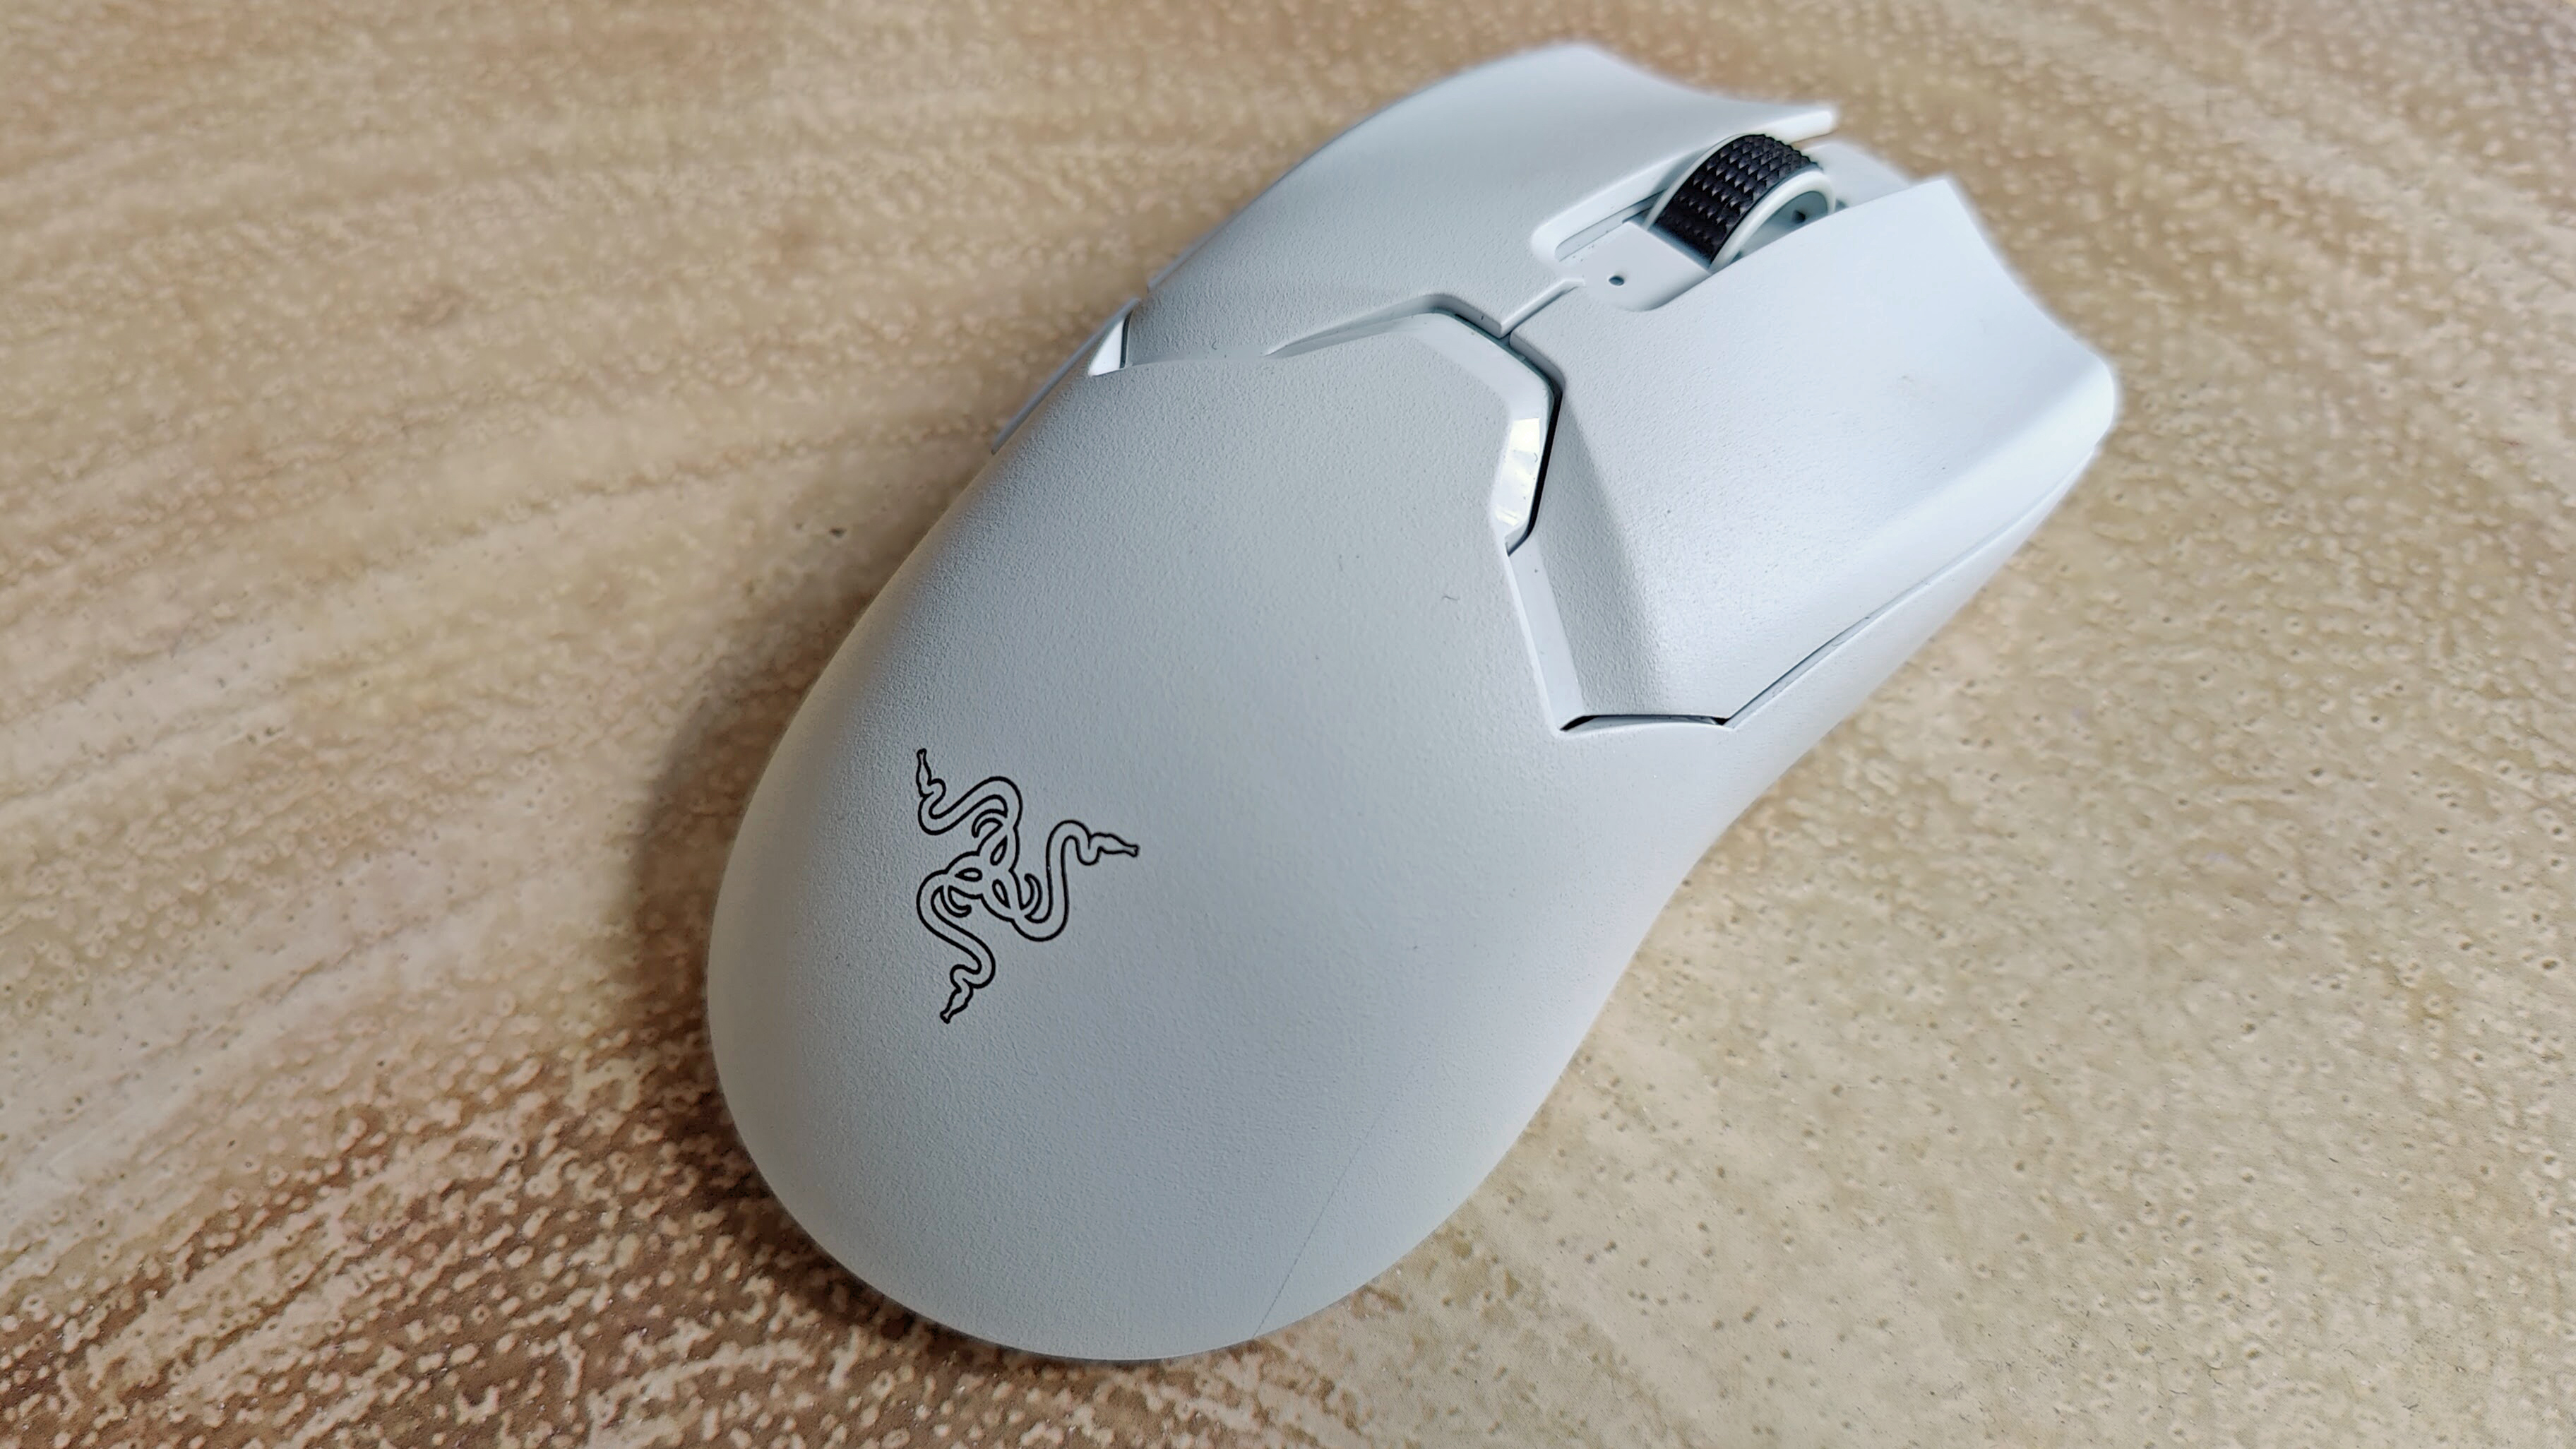 Razer Viper V2 Pro review: a feather-light wireless gaming mouse | T3